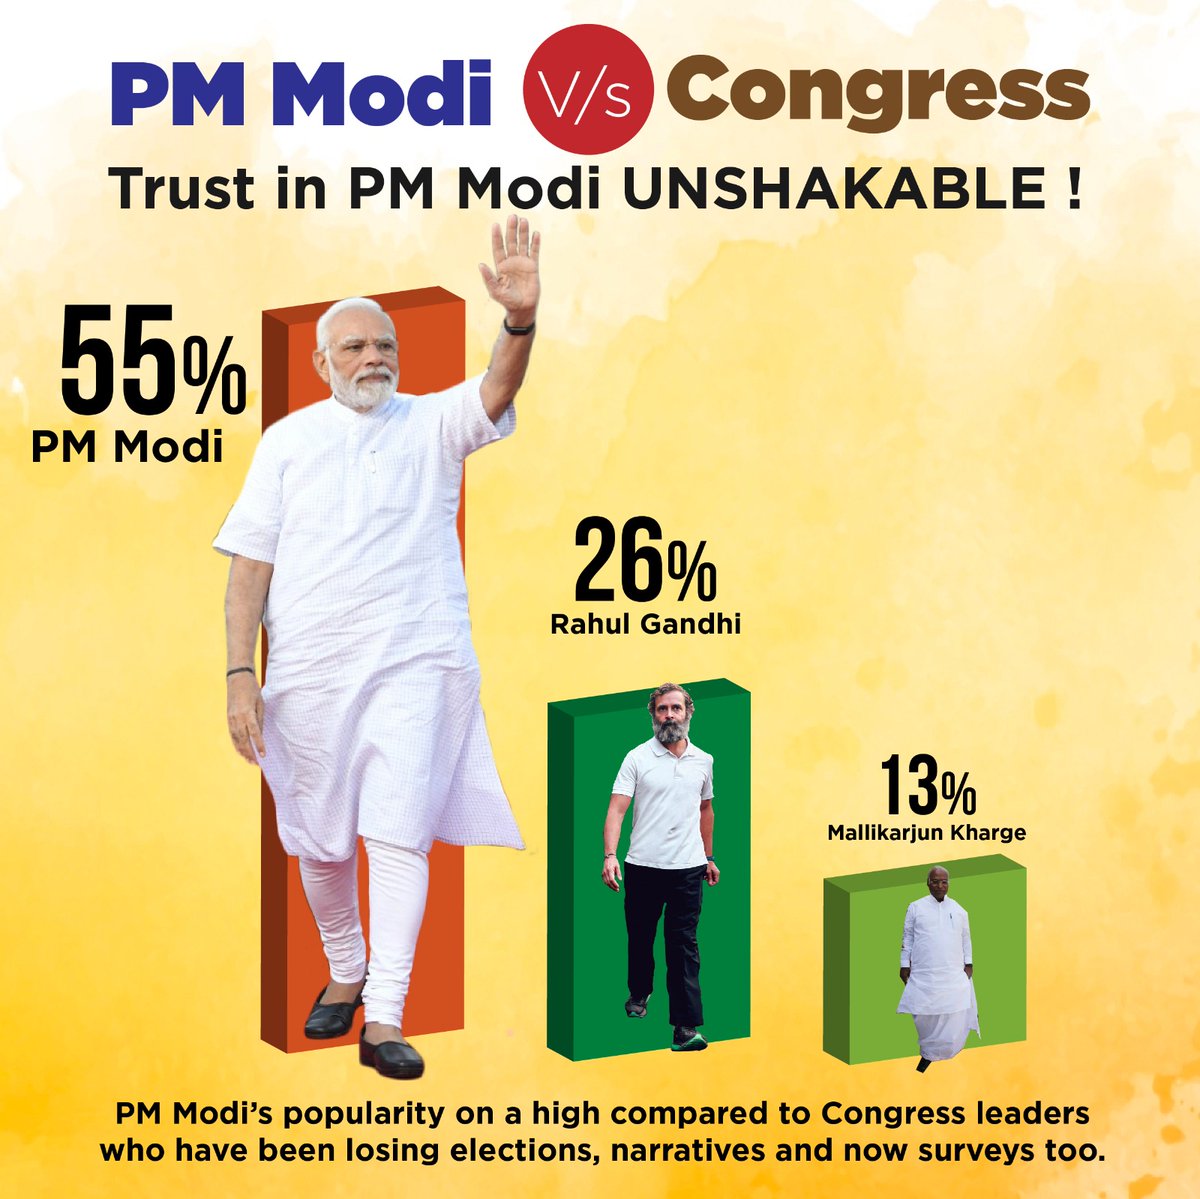 People's trust in PM Modi leads by a huge margin compared to top Congress leadership. The delivery of promises with Zero corruption in last 9 years takes the win.

#PewResearchCenter